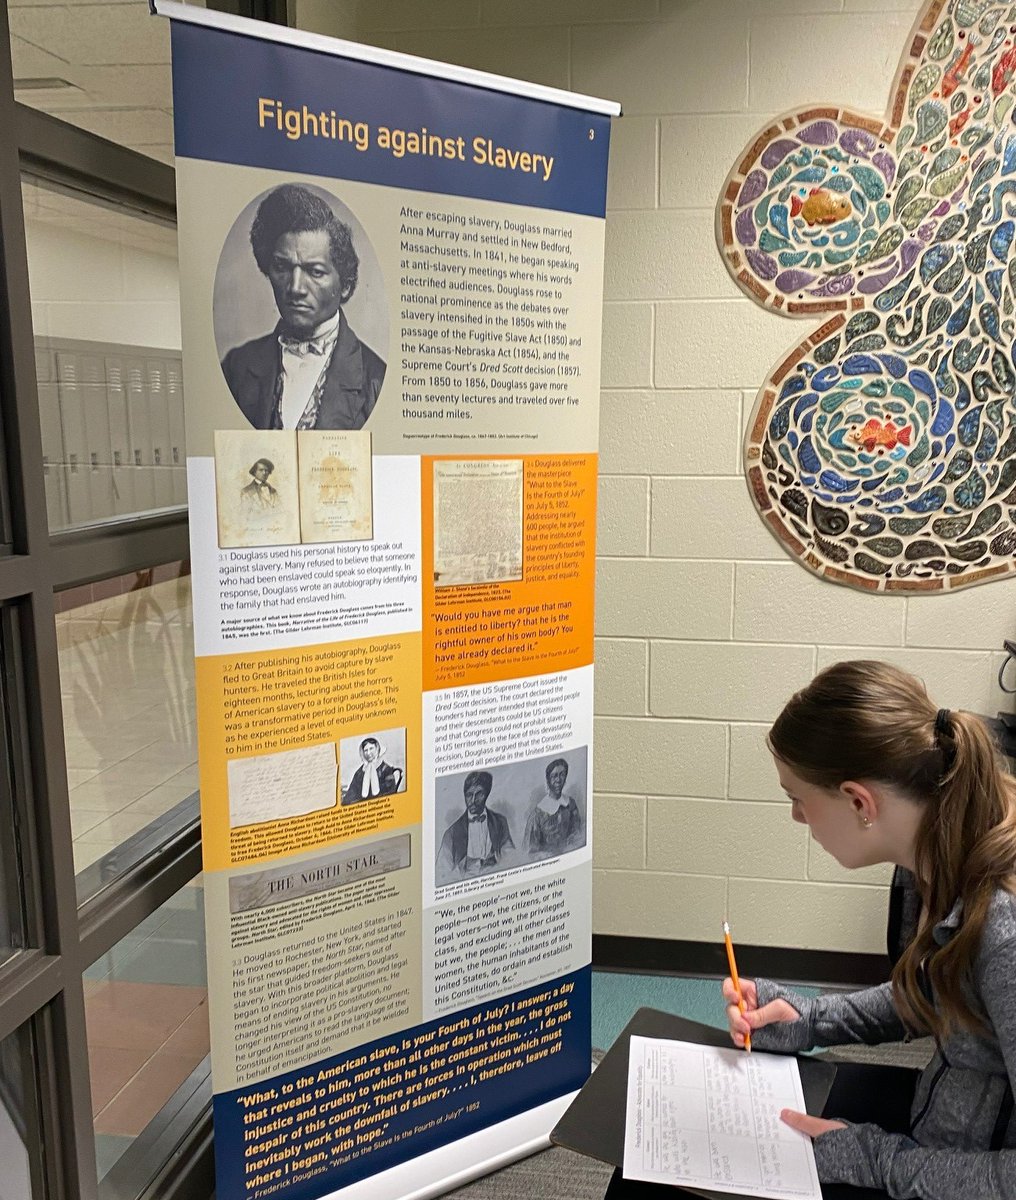 Today Ss had the opportunity to learn more about the legacy of Frederick Douglass by exploring the Traveling Frederick Douglass exhibit. Thank you @Gilder_Lehrman for providing this opportunity to learn and engage in history. #Togetheraswarriors